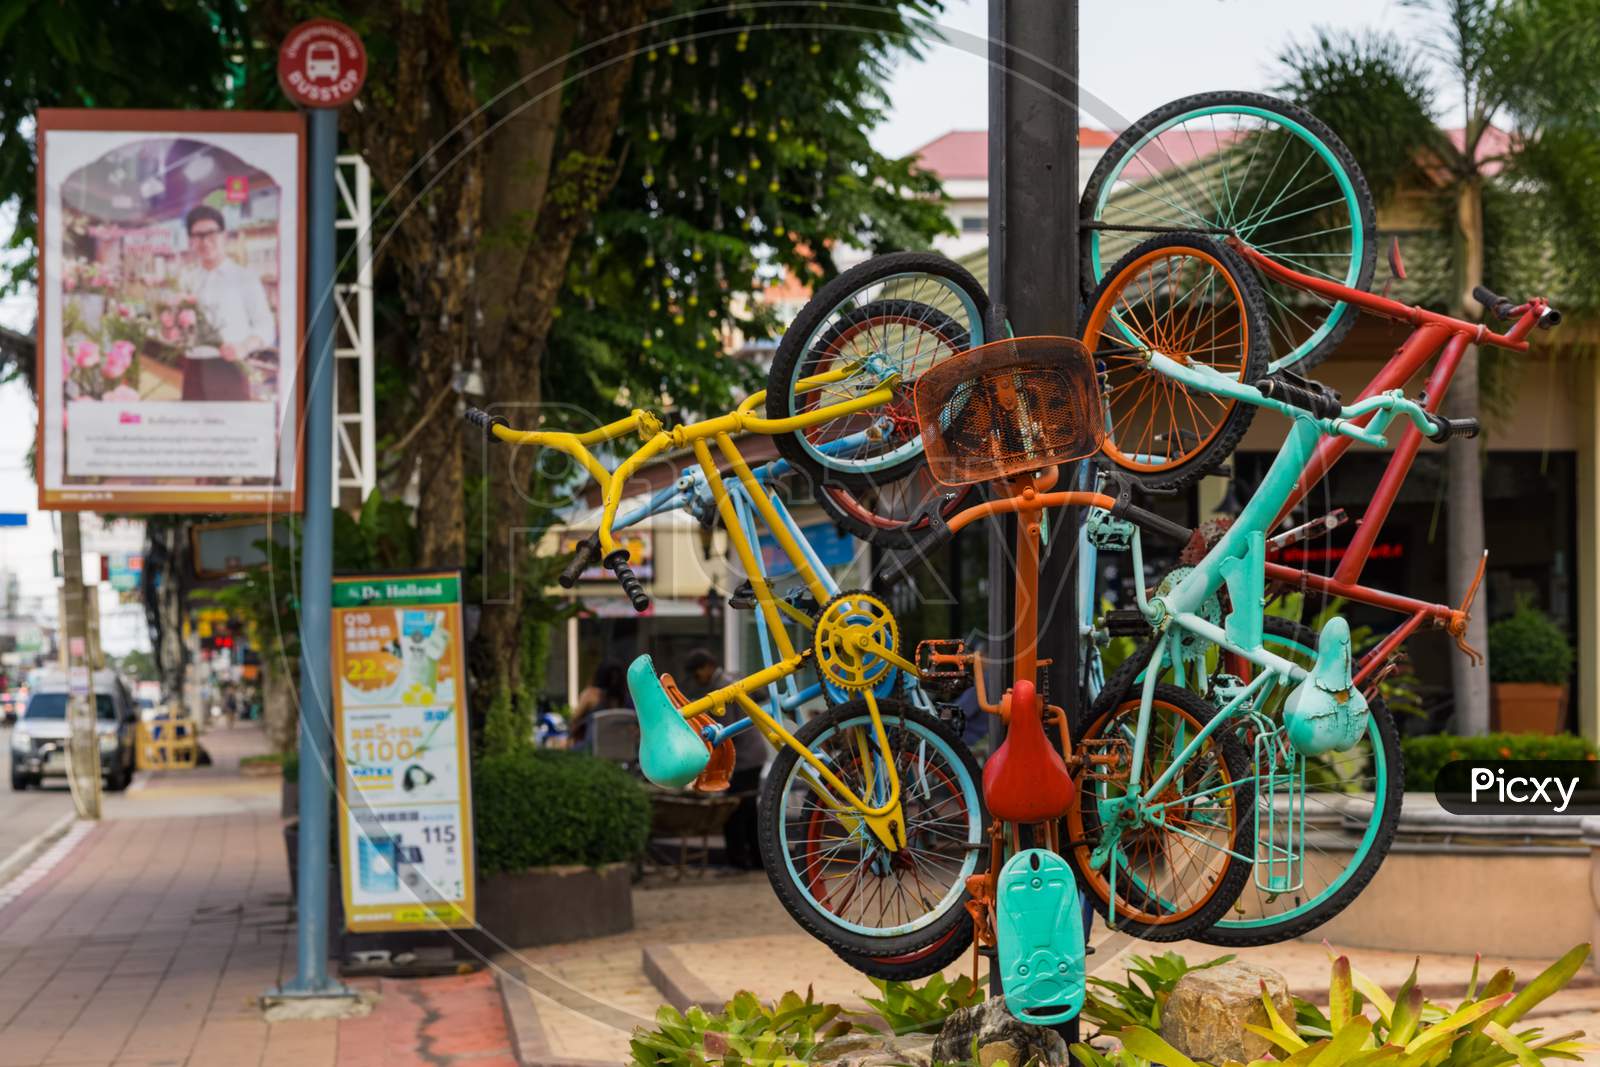 Naklua,Thailand - October 17,2018: Naklua Road This Is A Colorful Decoration Made Out Of Bikes.This Area Is A Popular Place Among Tourists From Germany.